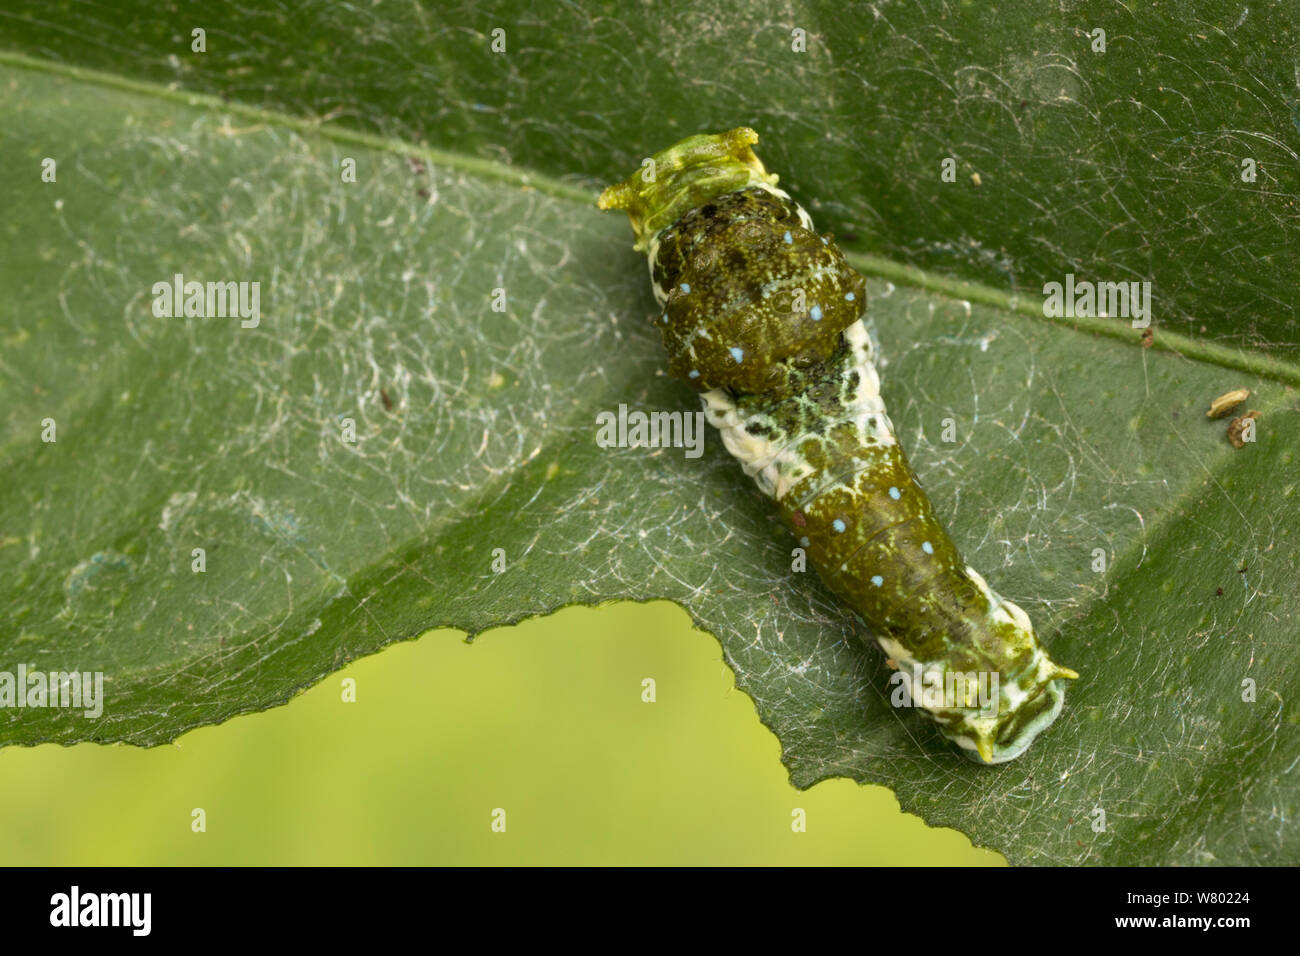 Caterpillar of the Citrus Swallowtail butterfly (Papillio demodocus). The caterpillar is a bird dropping mimic. Captive, originating from Africa. Stock Photo